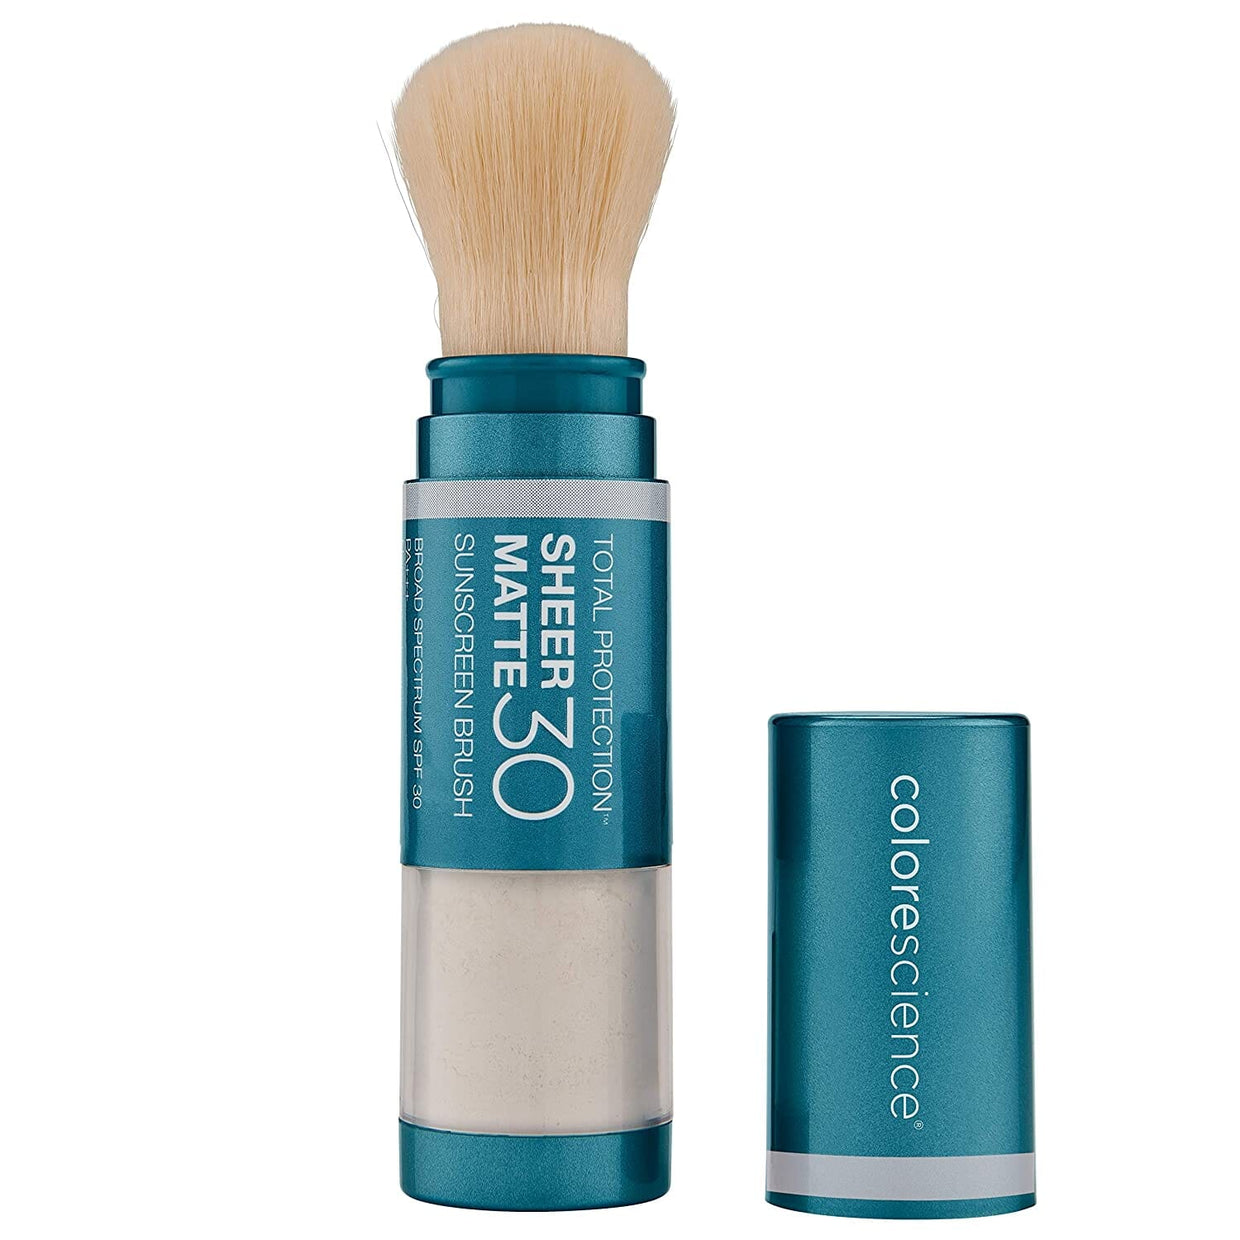 Colorescience Sunforgettable Total Protection Sheer Matte SPF 30 Sunscreen Brush Colorescience 0.15 oz. Shop at Exclusive Beauty Club